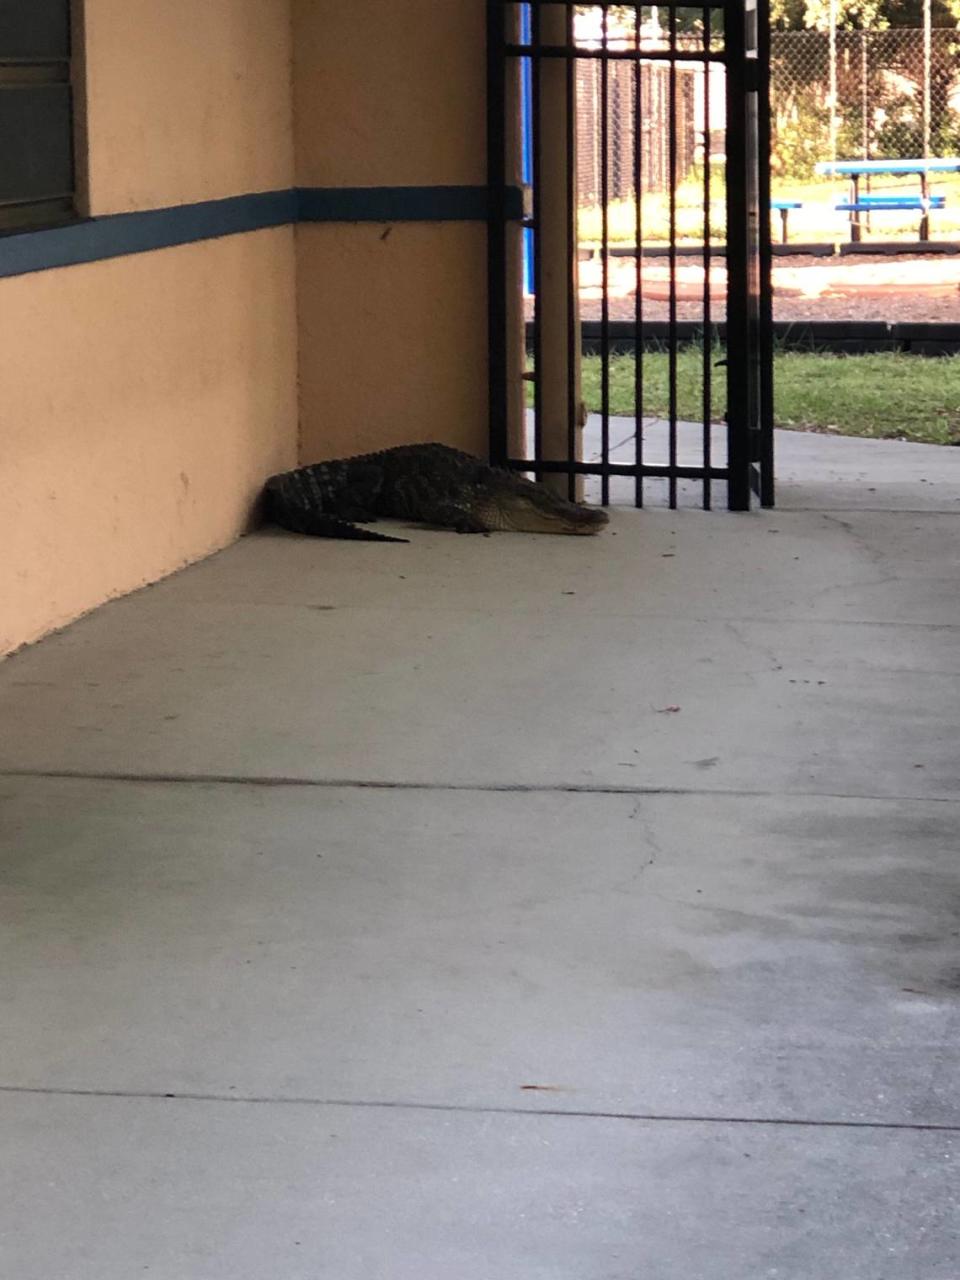 An alligator was found on the grounds of Palm View Elementary School in Palmetto in 2019. School officials said Florida Fish and Wildlife Conservation Commission officials were called to remove the 8-foot, 2-inch gator.